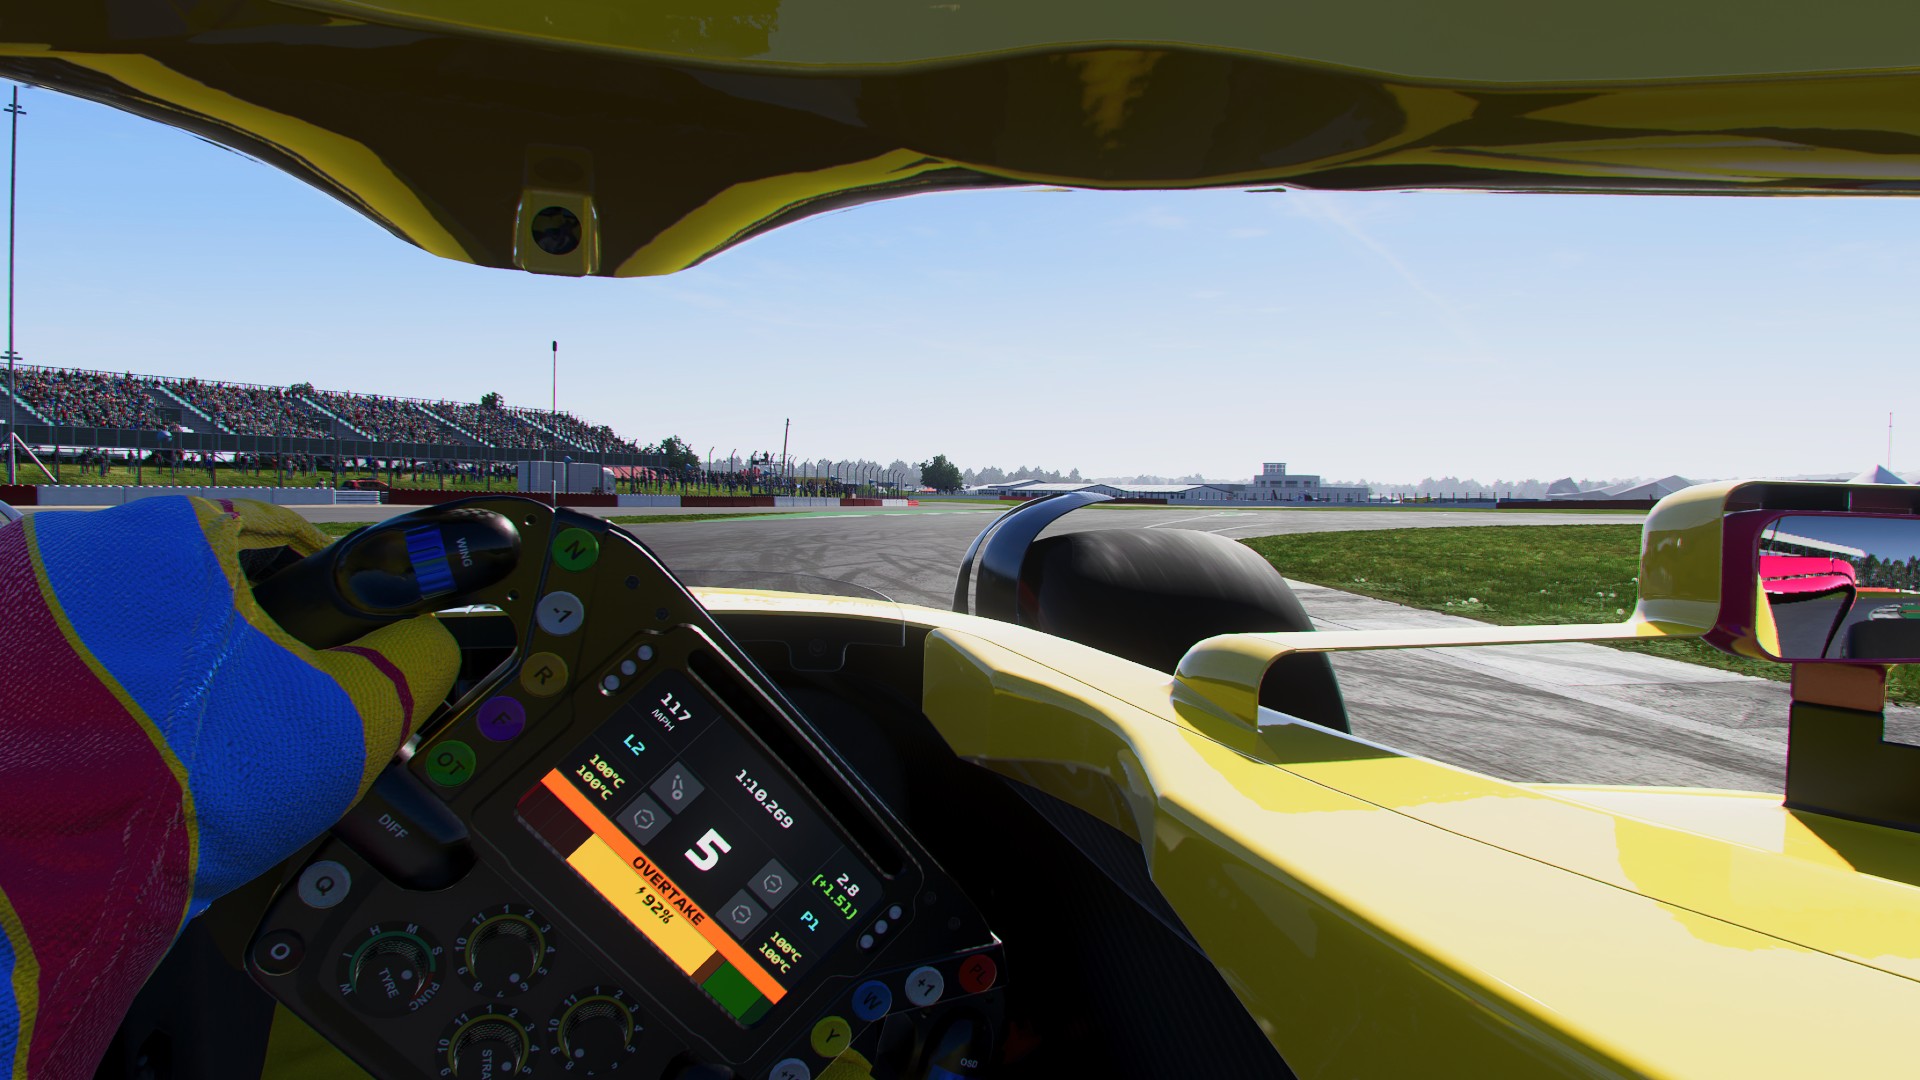 Is F1 23 game making the right changes? Our verdict - The Race